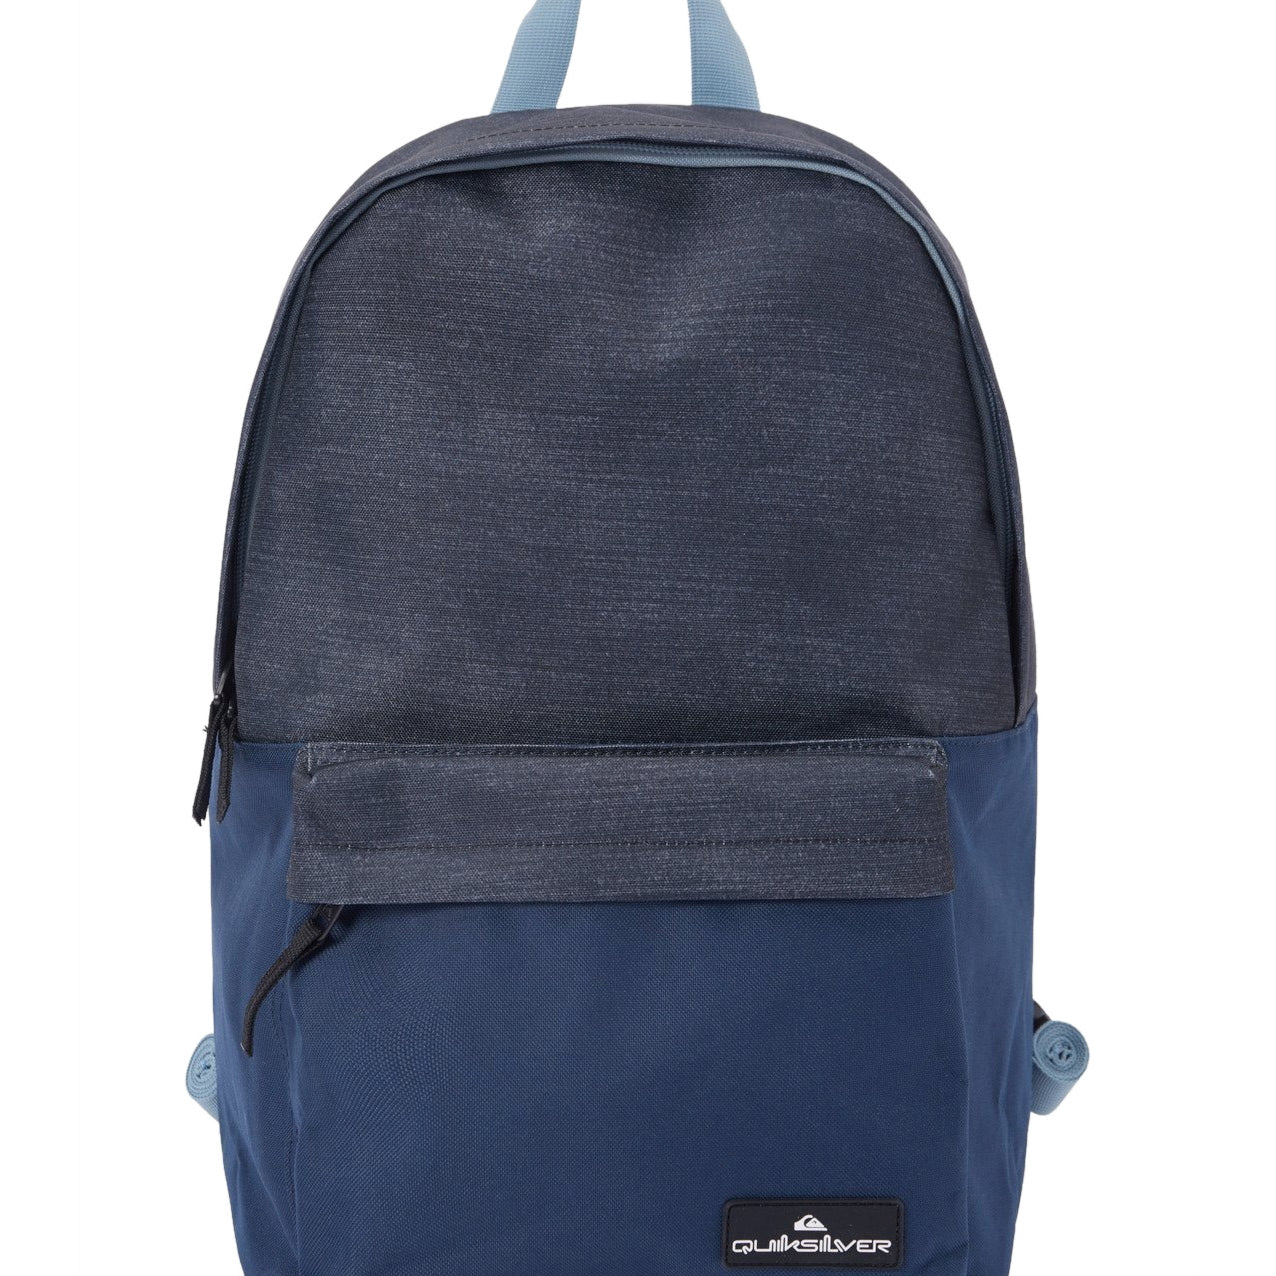 Quiksilver The Poster 26L Medium Backpack XBBS OS